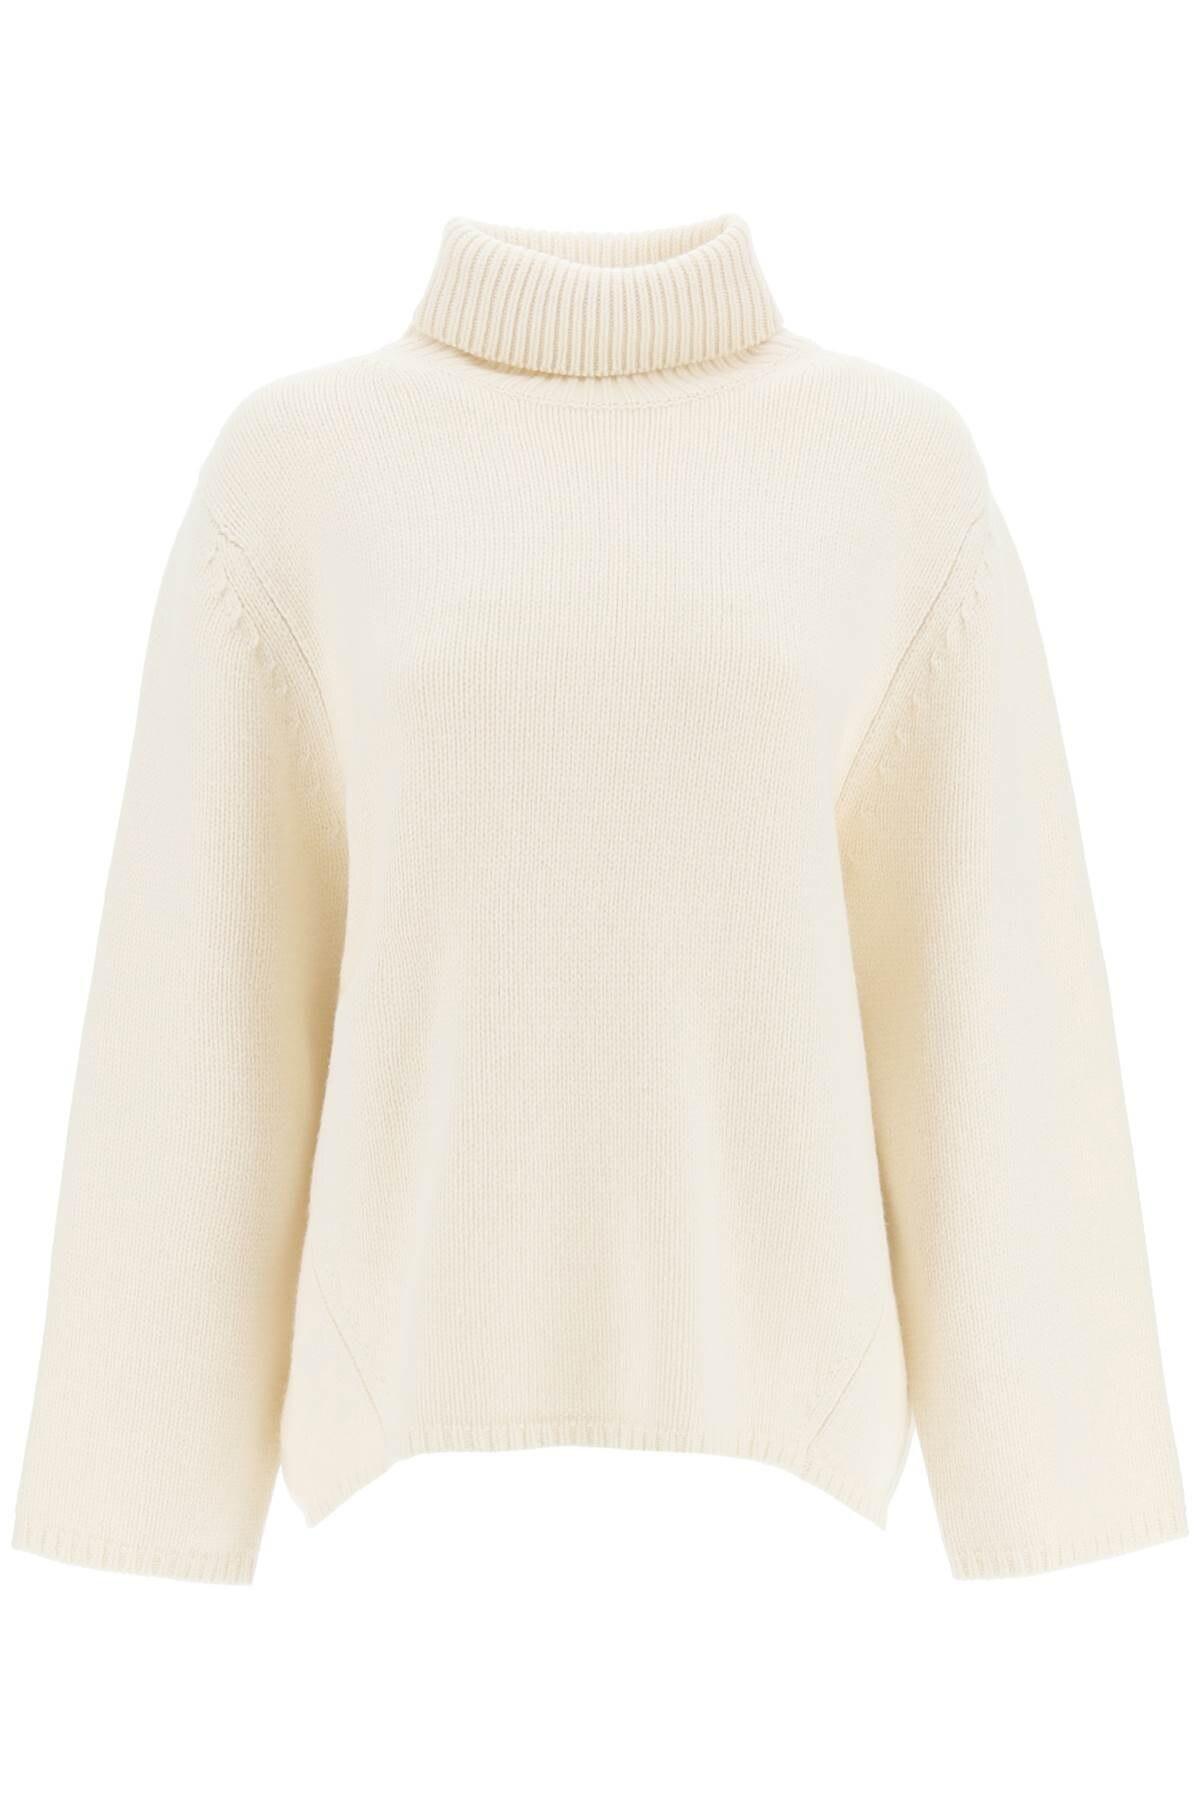 Totême Oversized Wool And Cashmere Turtleneck Sweater in White | Lyst ...